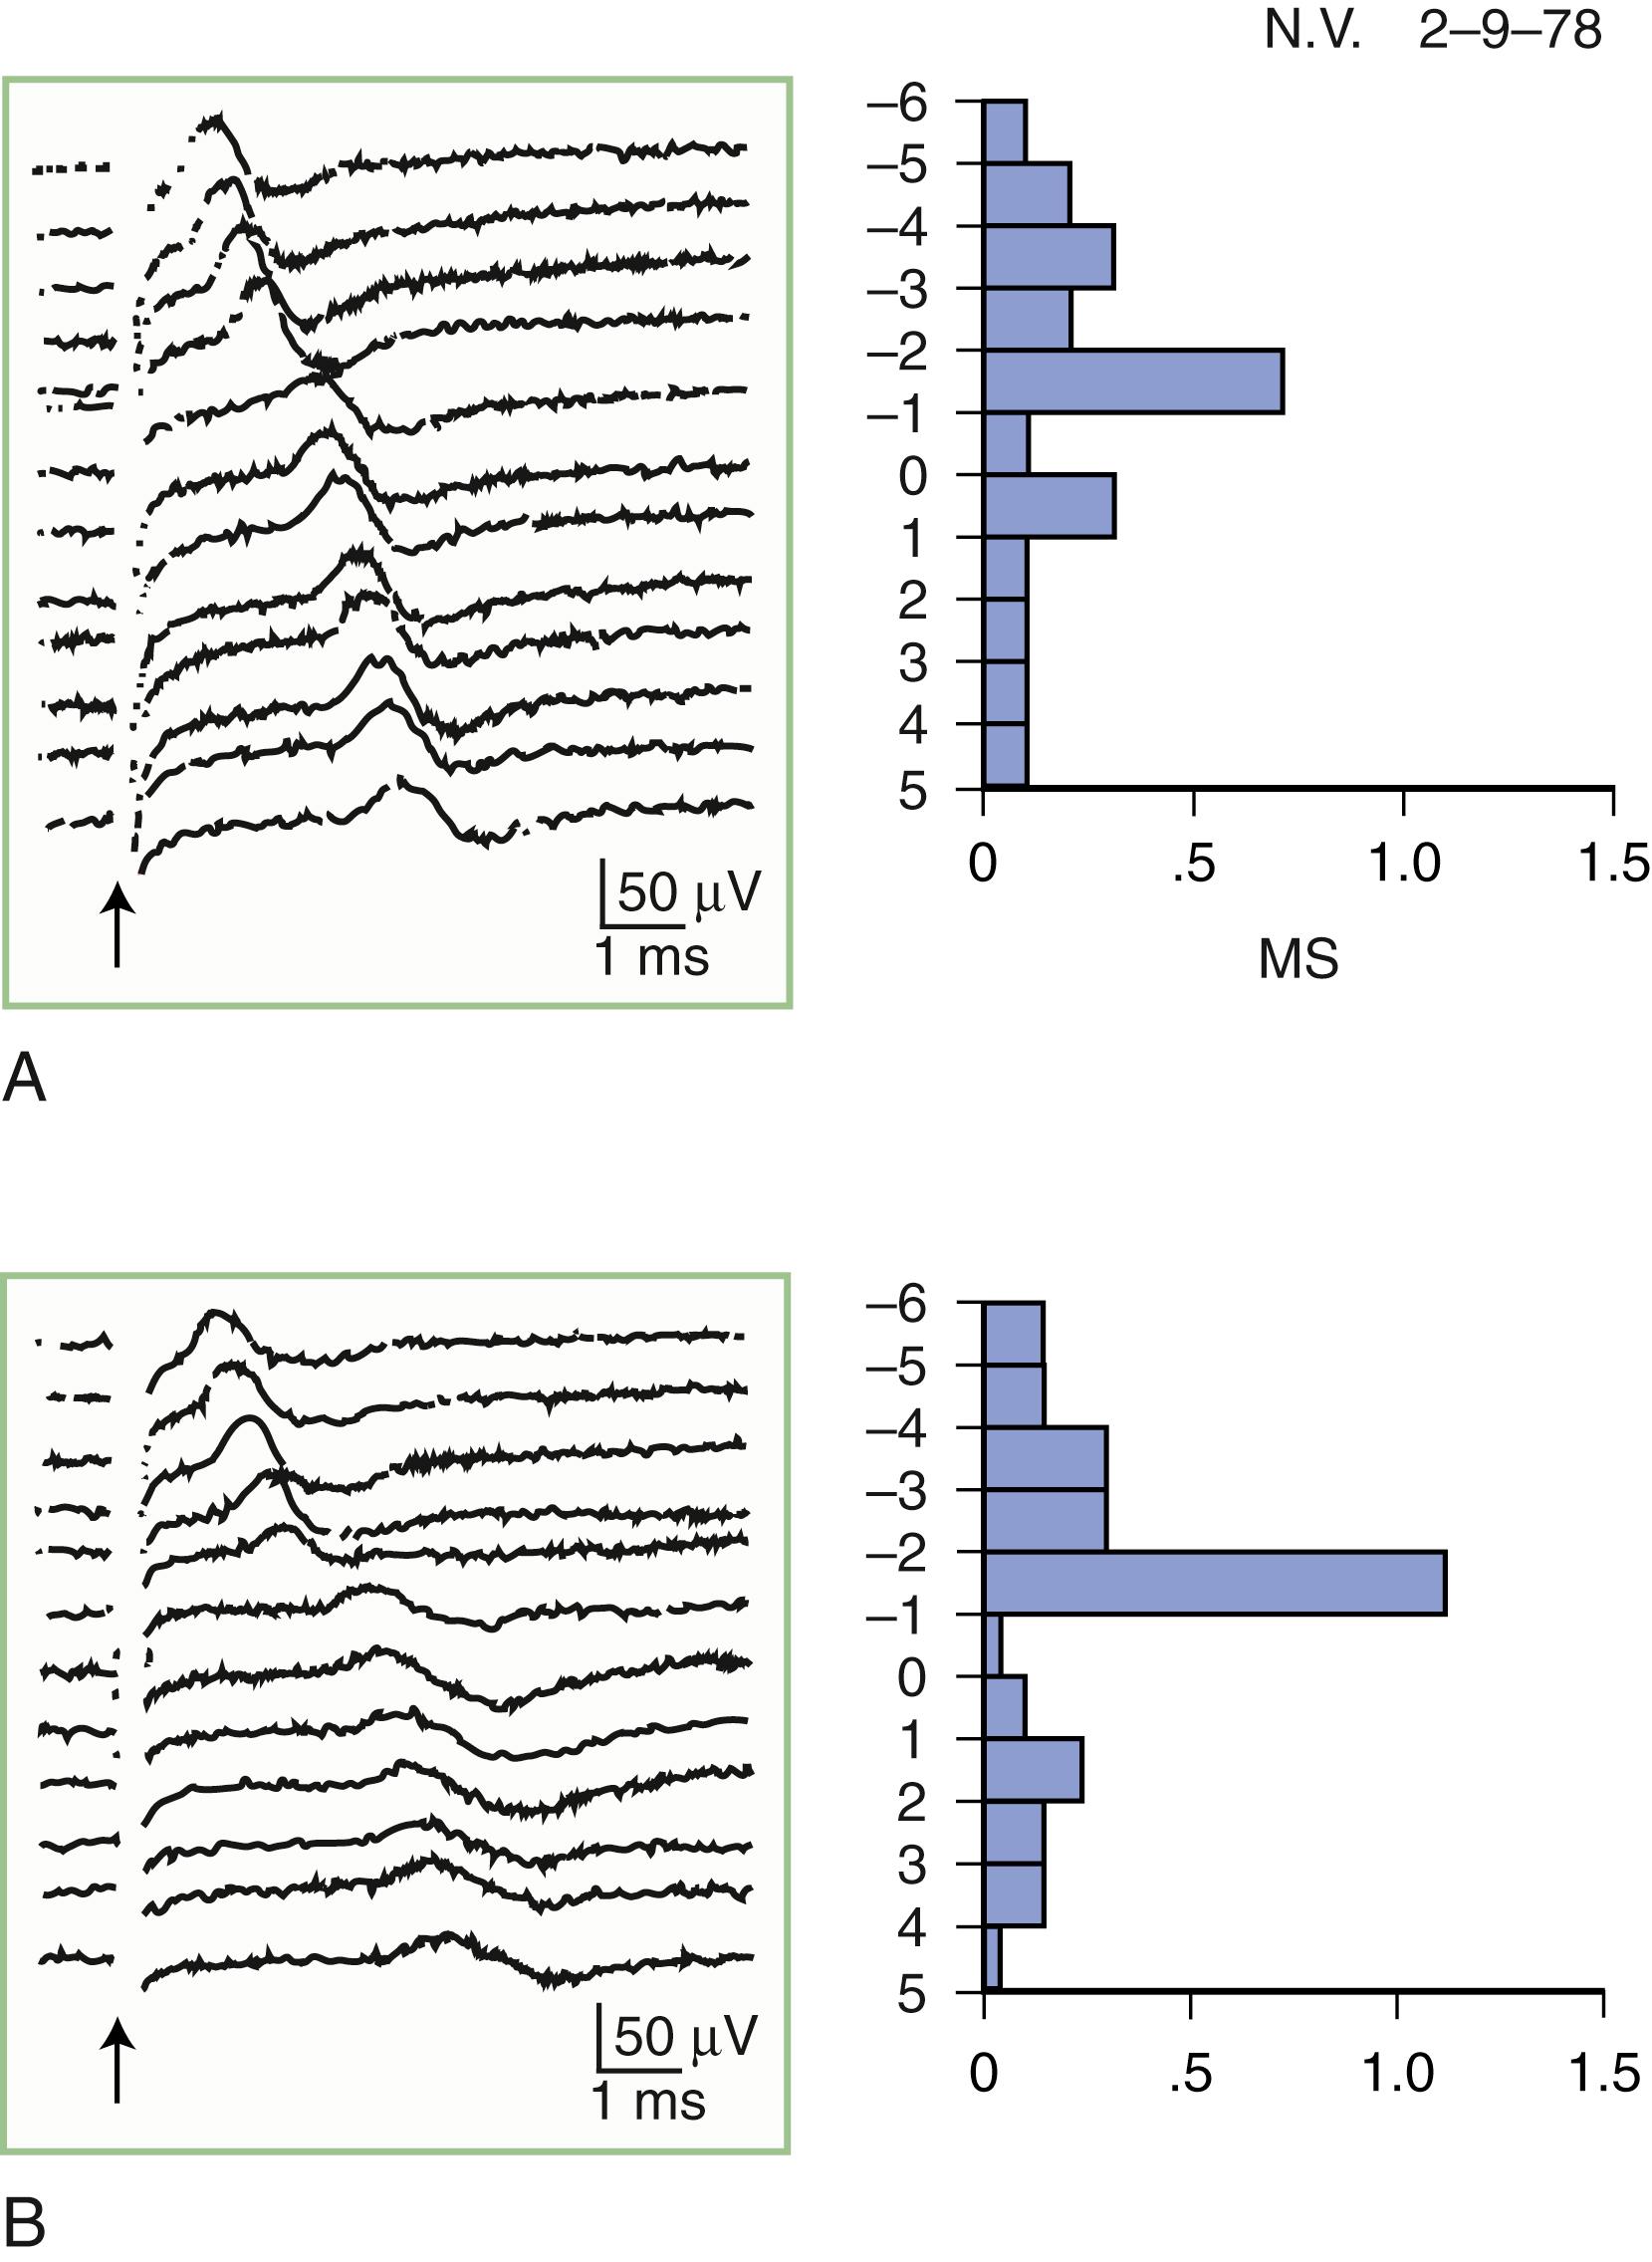 Fig. 36.4, Sensory nerve action potentials in a patient with bilateral carpal tunnel syndrome (see also Fig. 36.3 for settings). A sharply localized slowing was found from point −2 to point −1 in both hands, with a latency change measuring 0.7 ms on the left ( A ) and 1.1 ms on the right ( B ), compared with the other segments with normal latency changes of approximately 0.16–0.21 ms. Note also a distinct change in waveform of the sensory potential at the point of localized conduction delay.